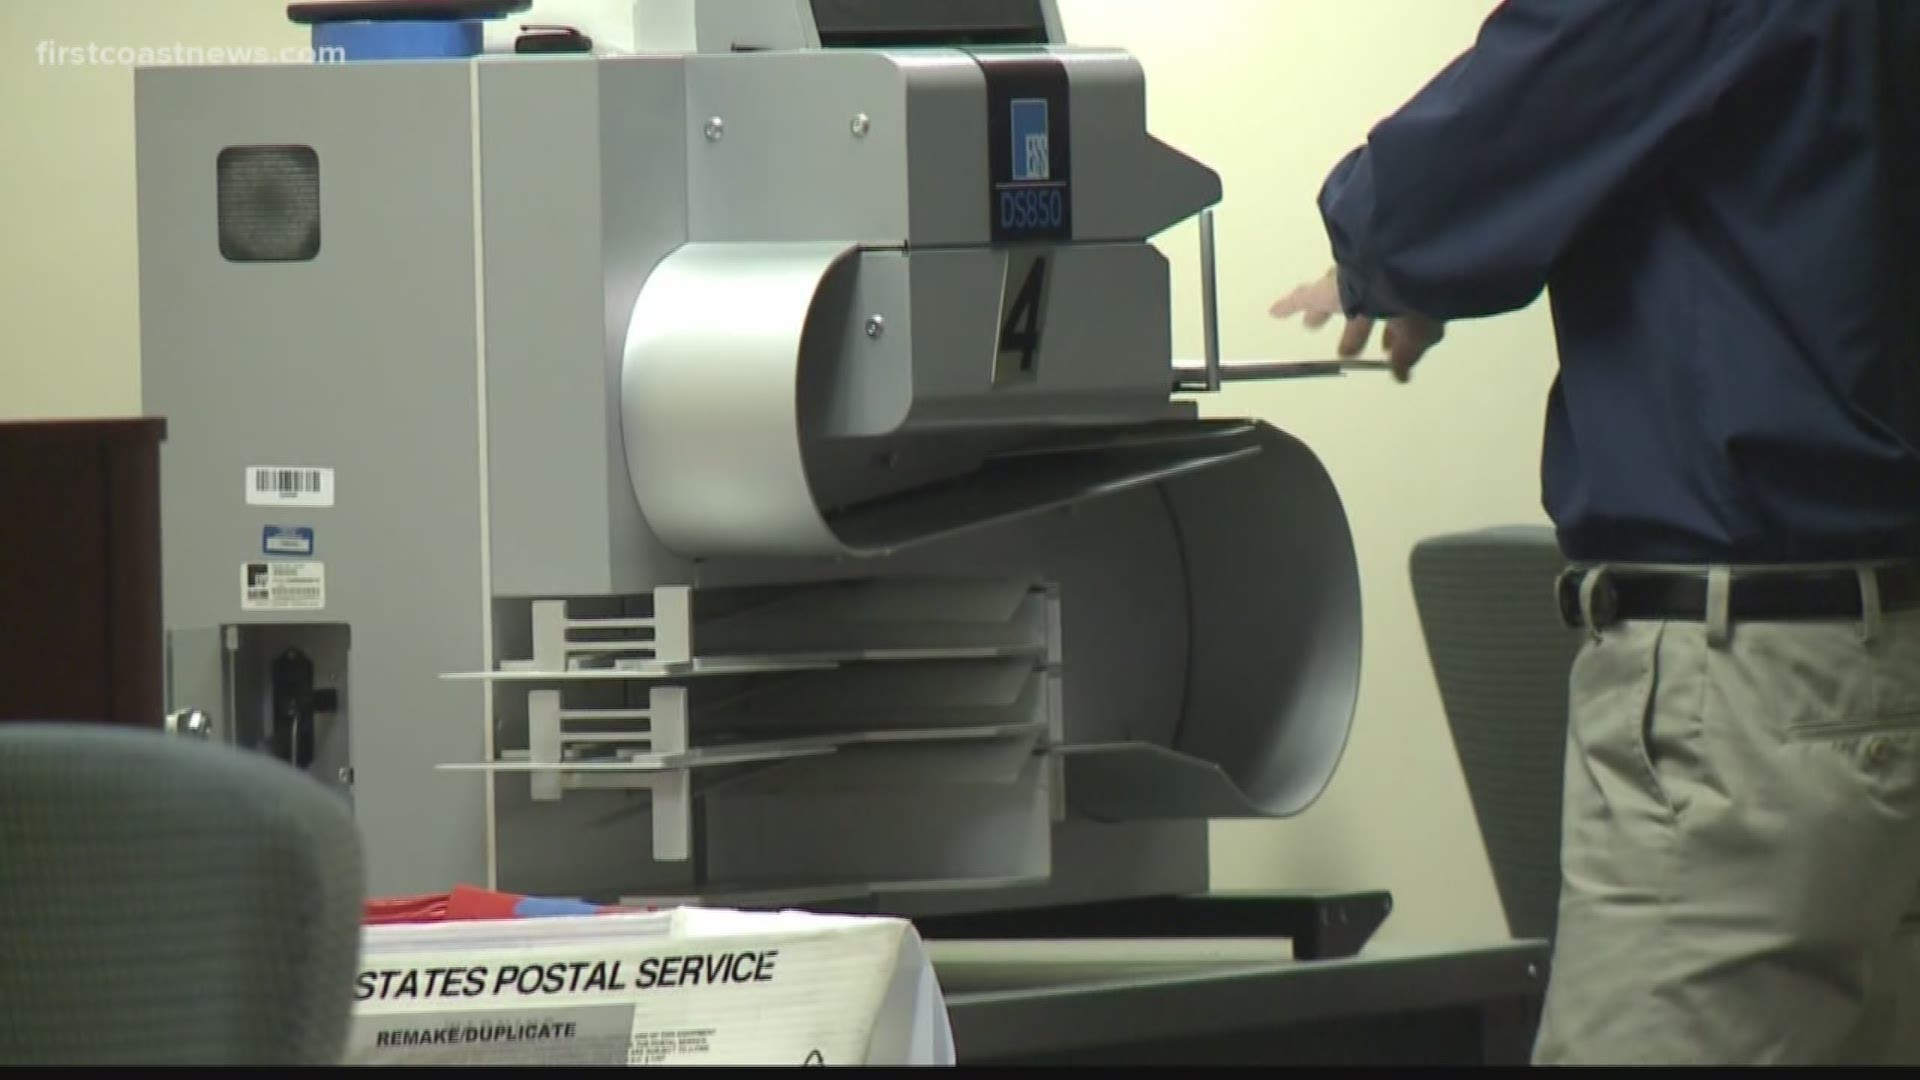 Due to a faulty machine, some 15,000 ballots from the recount were not counted in Duval County.